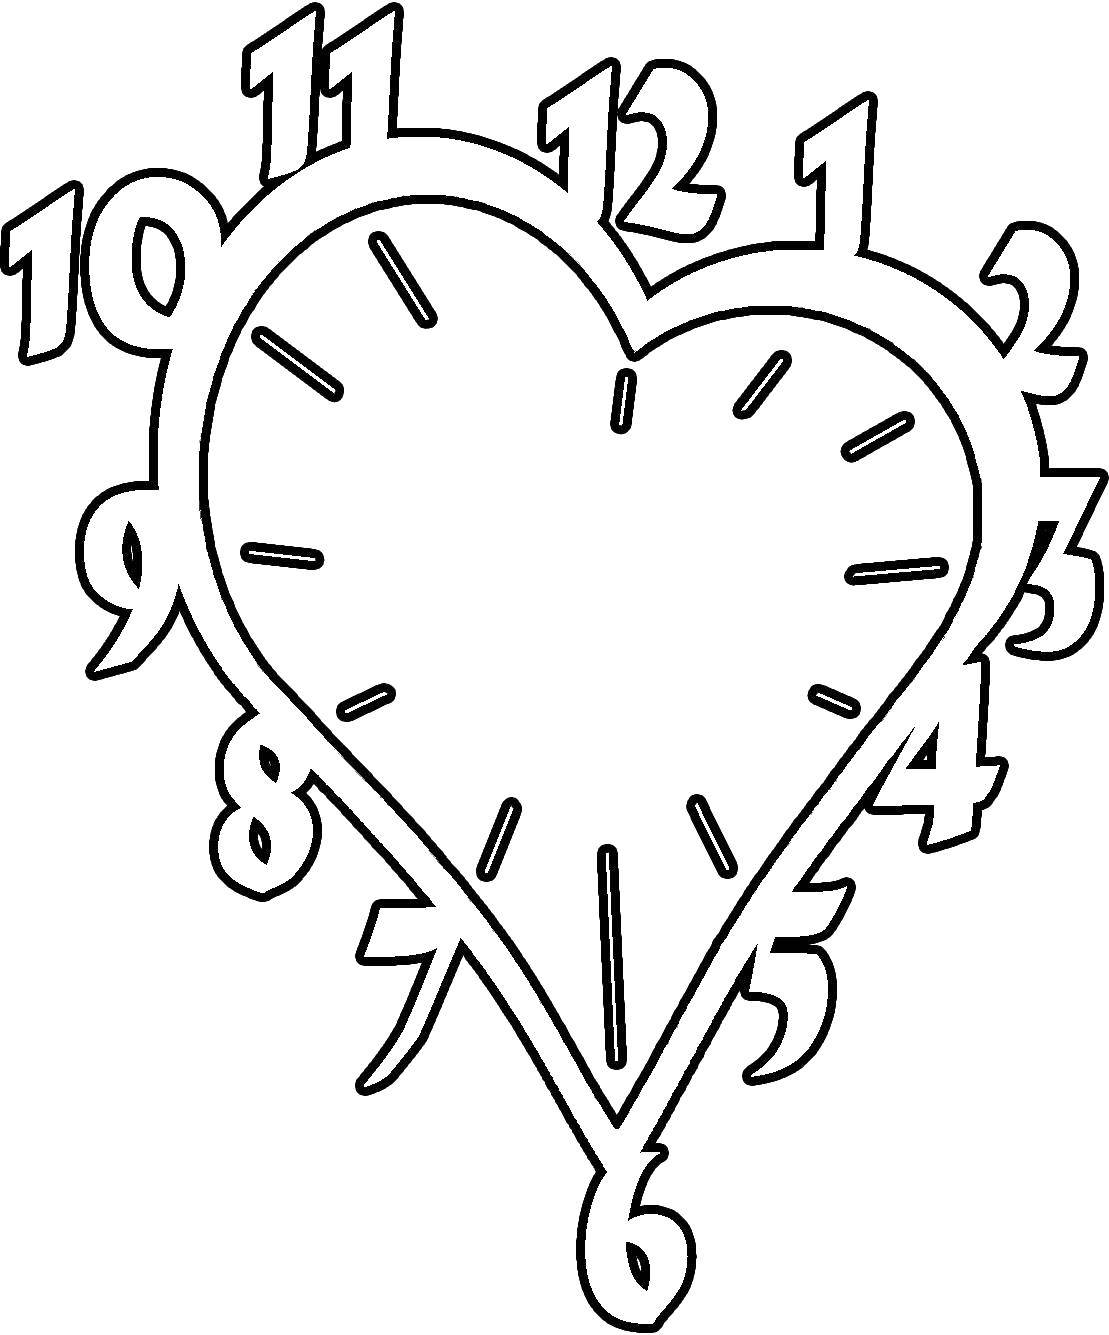 Coloring Watch heart. Category Watch. Tags:  Watch.